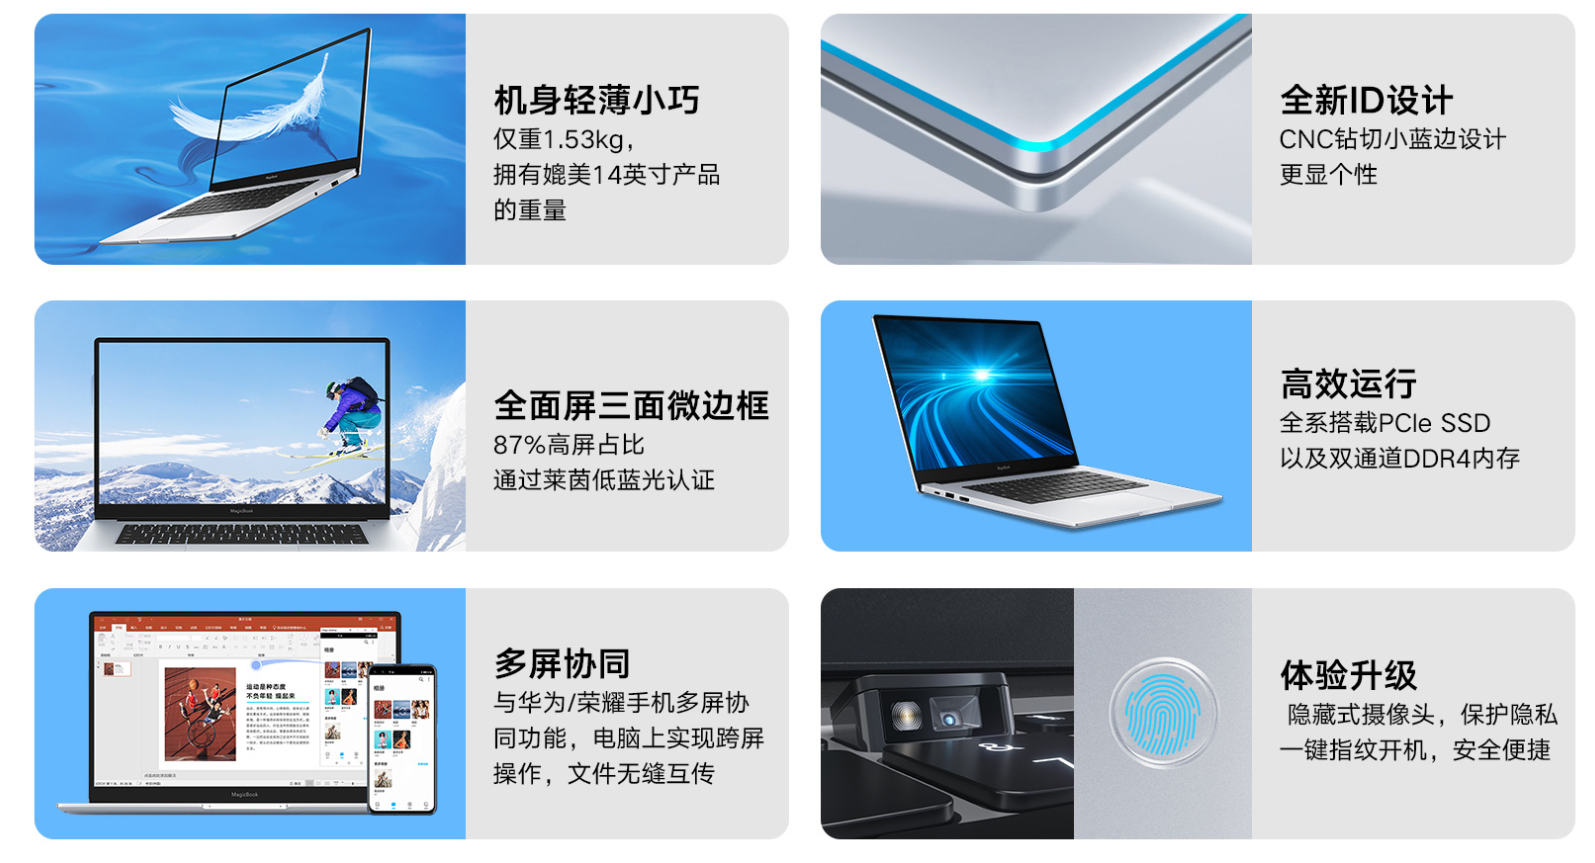 Honor MagicBook 15 features